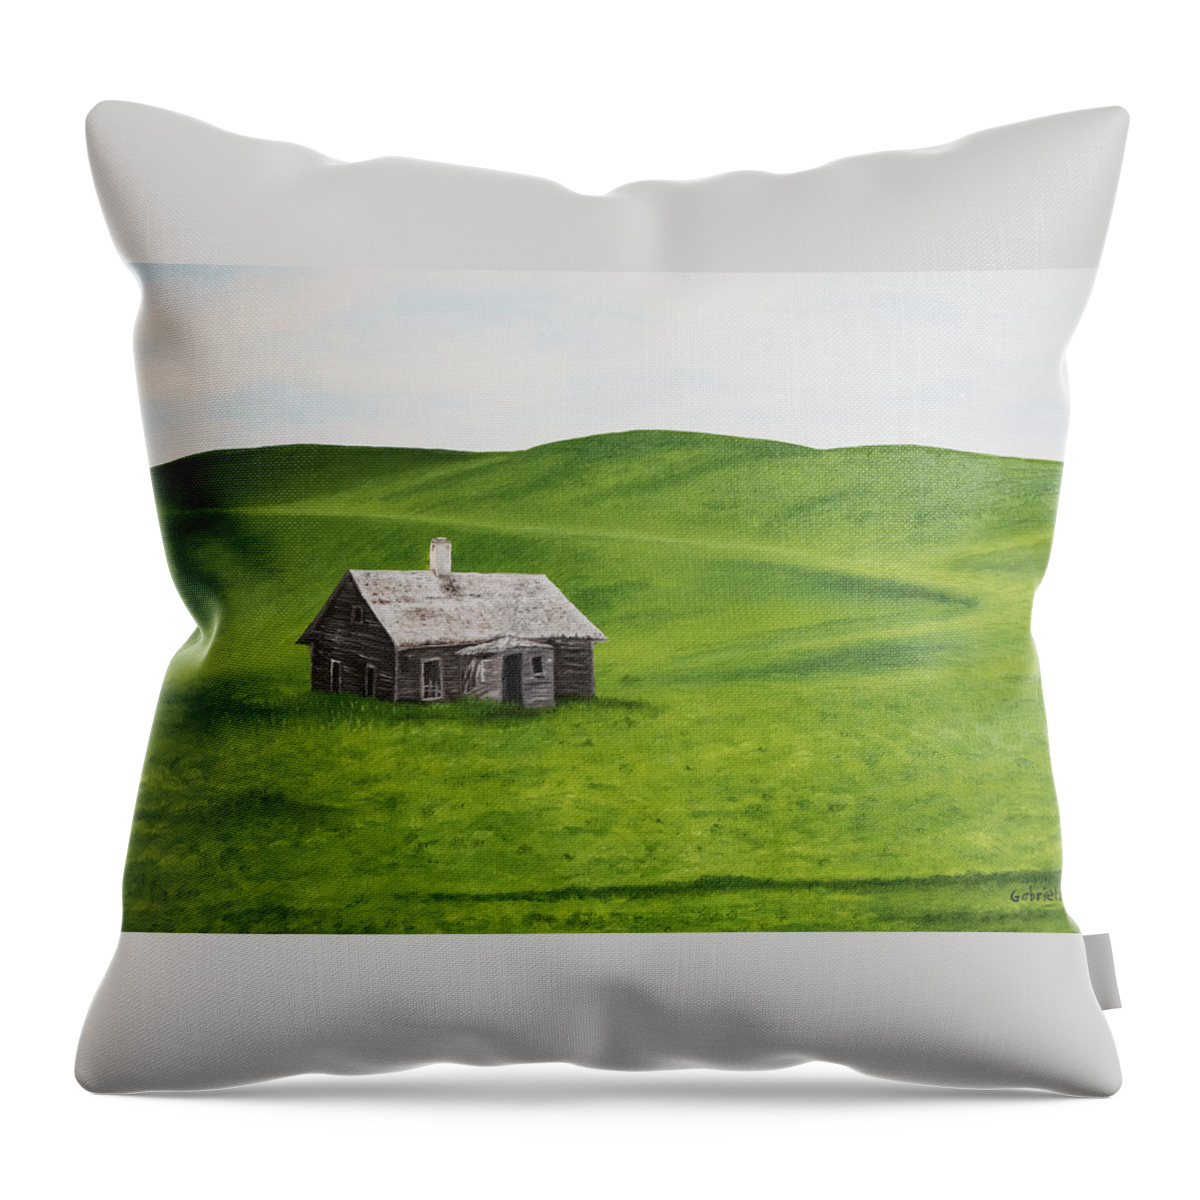 Landscape Throw Pillow featuring the painting Roads Forgotten by Gabrielle Munoz